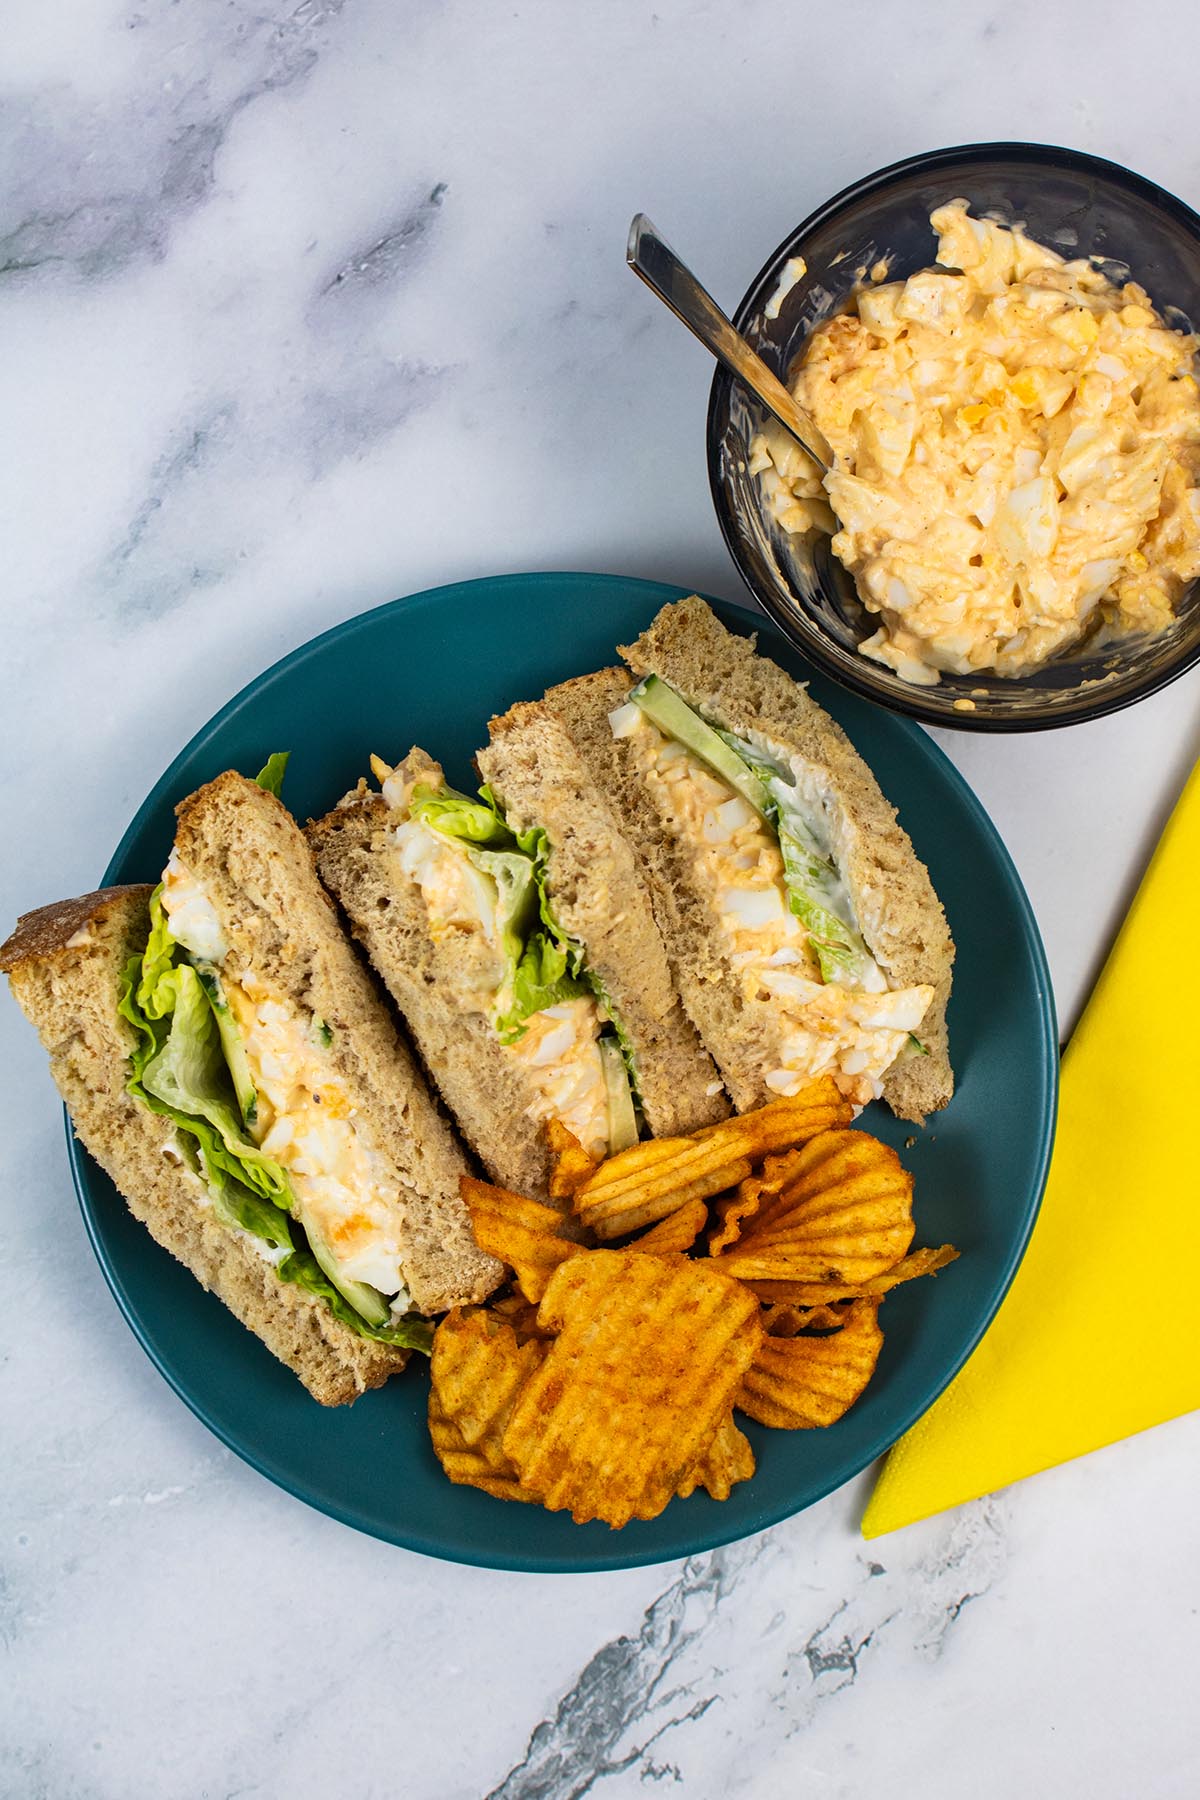 Egg mayonnaise sandwiches on a dark green plate with crinkle crisps. Small bowl of extra sandwich filler and yellow napkin in background